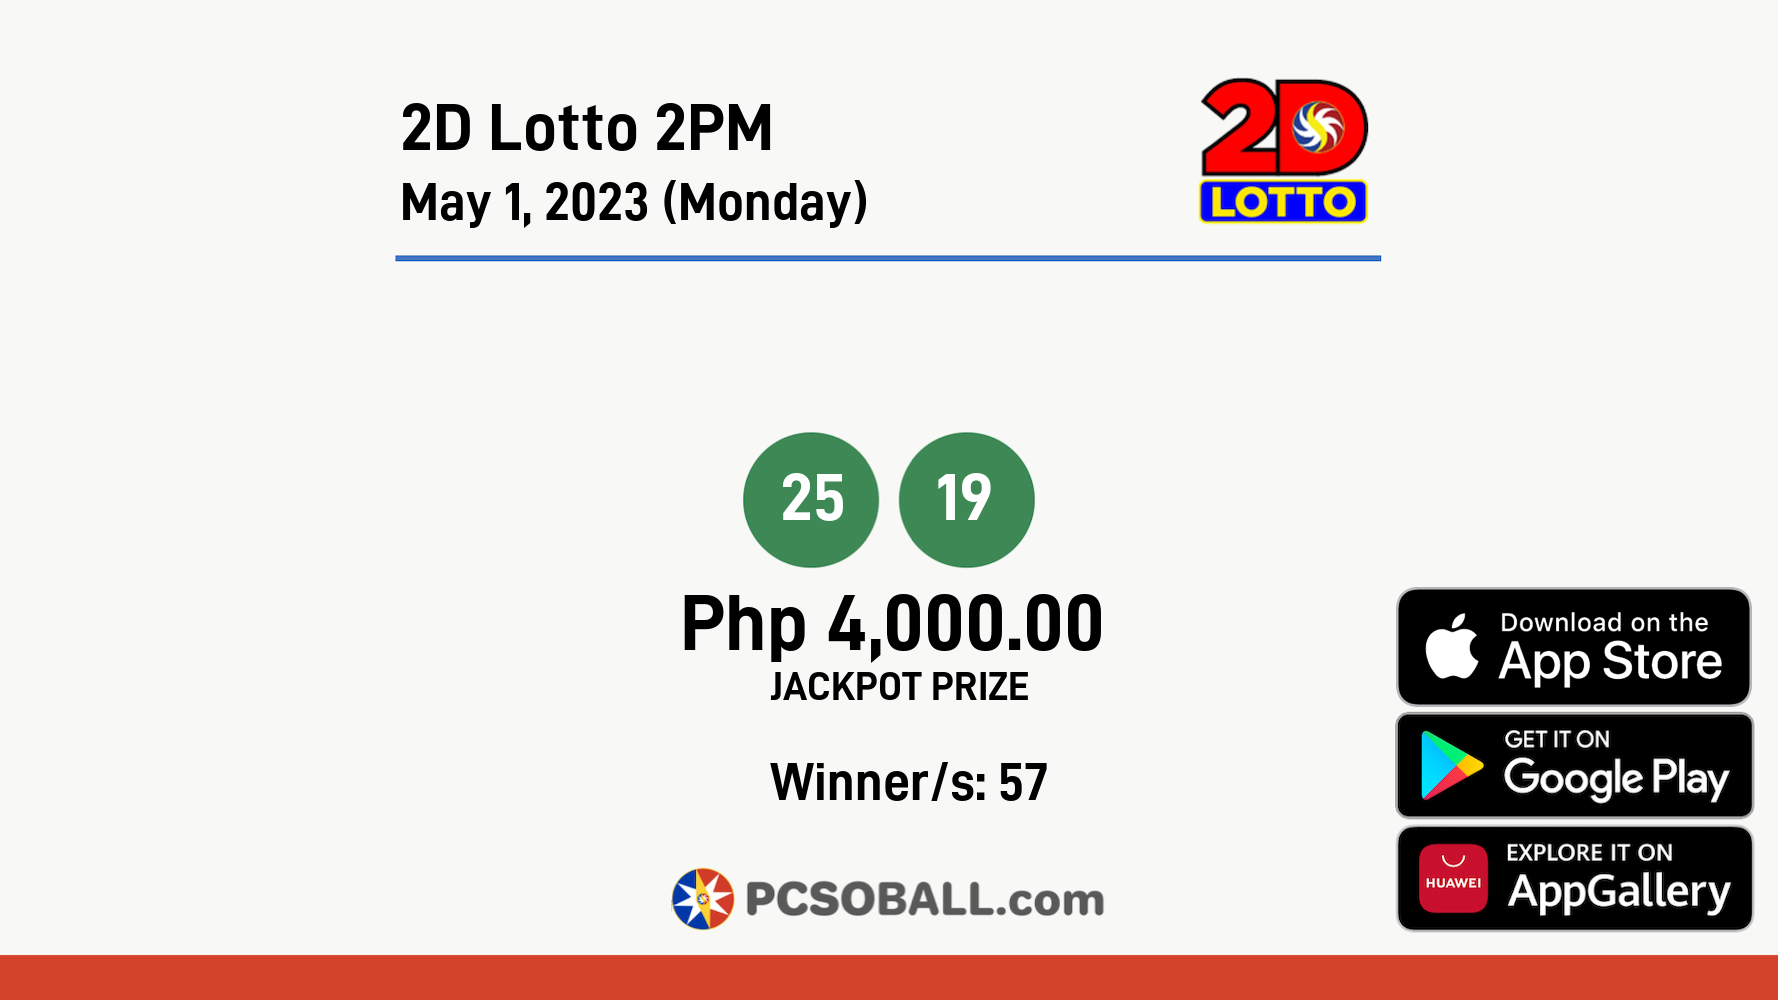 2D Lotto 2PM May 1, 2023 (Monday) Result